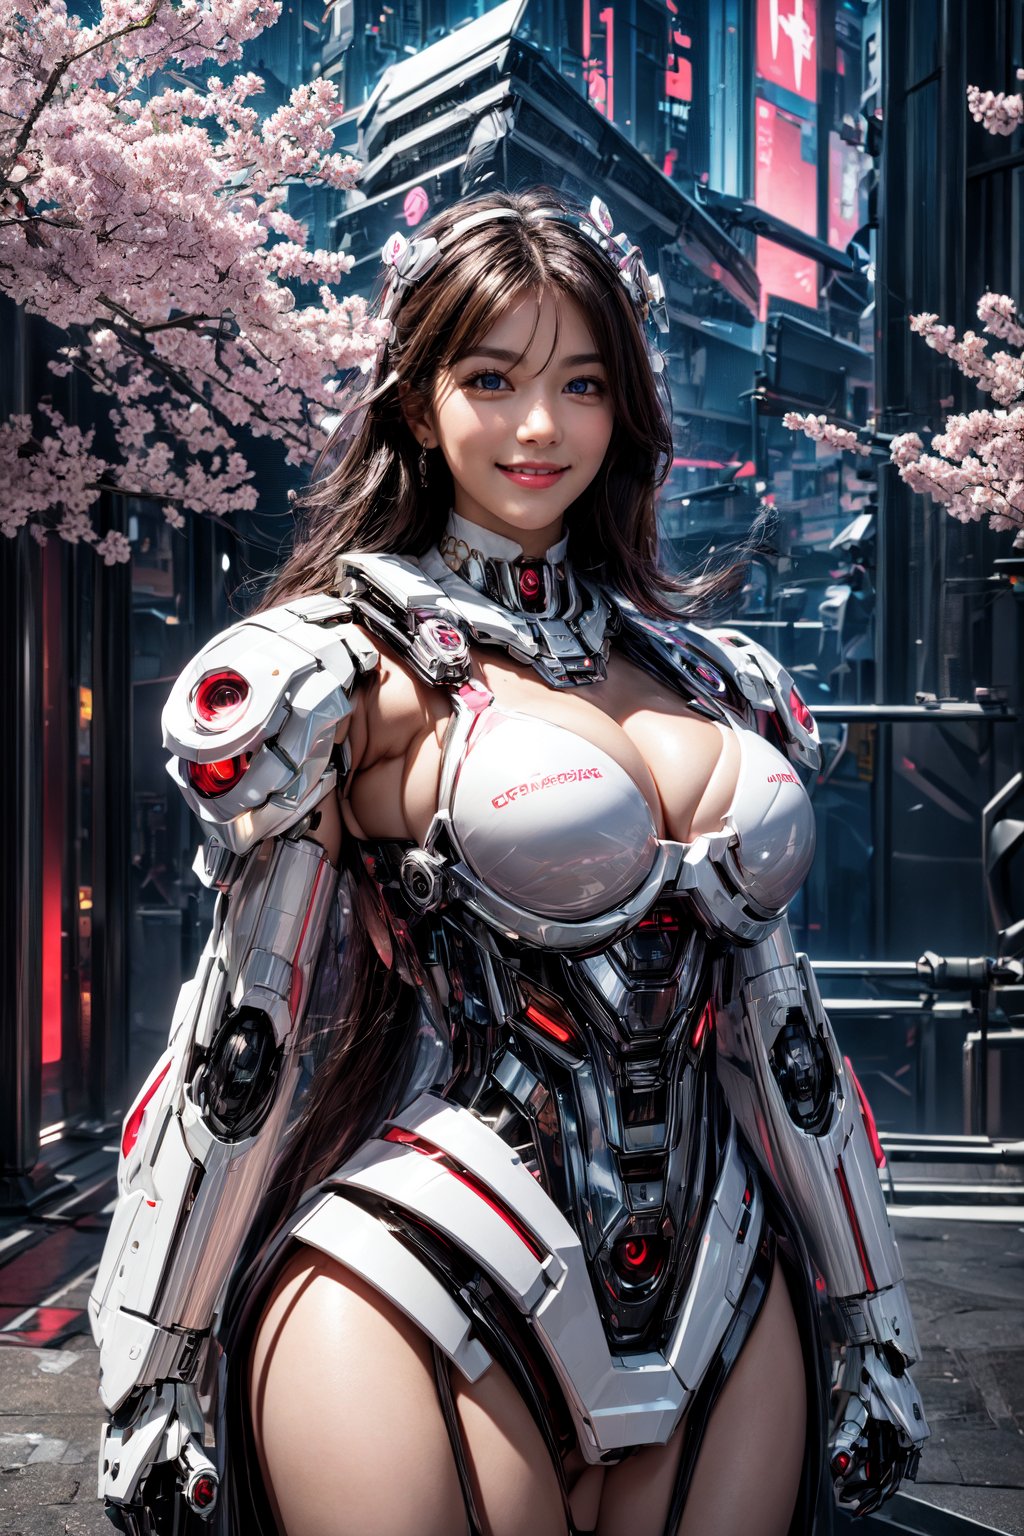 Masterpiece, High quality, 64K, Unity 64K Wallpaper, HDR, Best Quality, RAW, Super Fine Photography, Super High Resolution, Super Detailed, 
Beautiful and Aesthetic, Stunningly beautiful, Perfect proportions, 
1girl, Solo, White skin, Detailed skin, Realistic skin details, 
Futuristic Mecha, Arms Mecha, Dynamic pose, Battle stance, Swaying hair, by FuturEvoLab, 
Dark City Night, Cyberpunk city, Cyberpunk architecture, Future architecture, Fine architecture, Accurate architectural structure, Detailed complex busy background, Gorgeous, Cherry blossoms,
Sharp focus, Perfect facial features, Pure and pretty, Perfect eyes, Lively eyes, Elegant face, Delicate face, Exquisite face, Pink Mecha, 